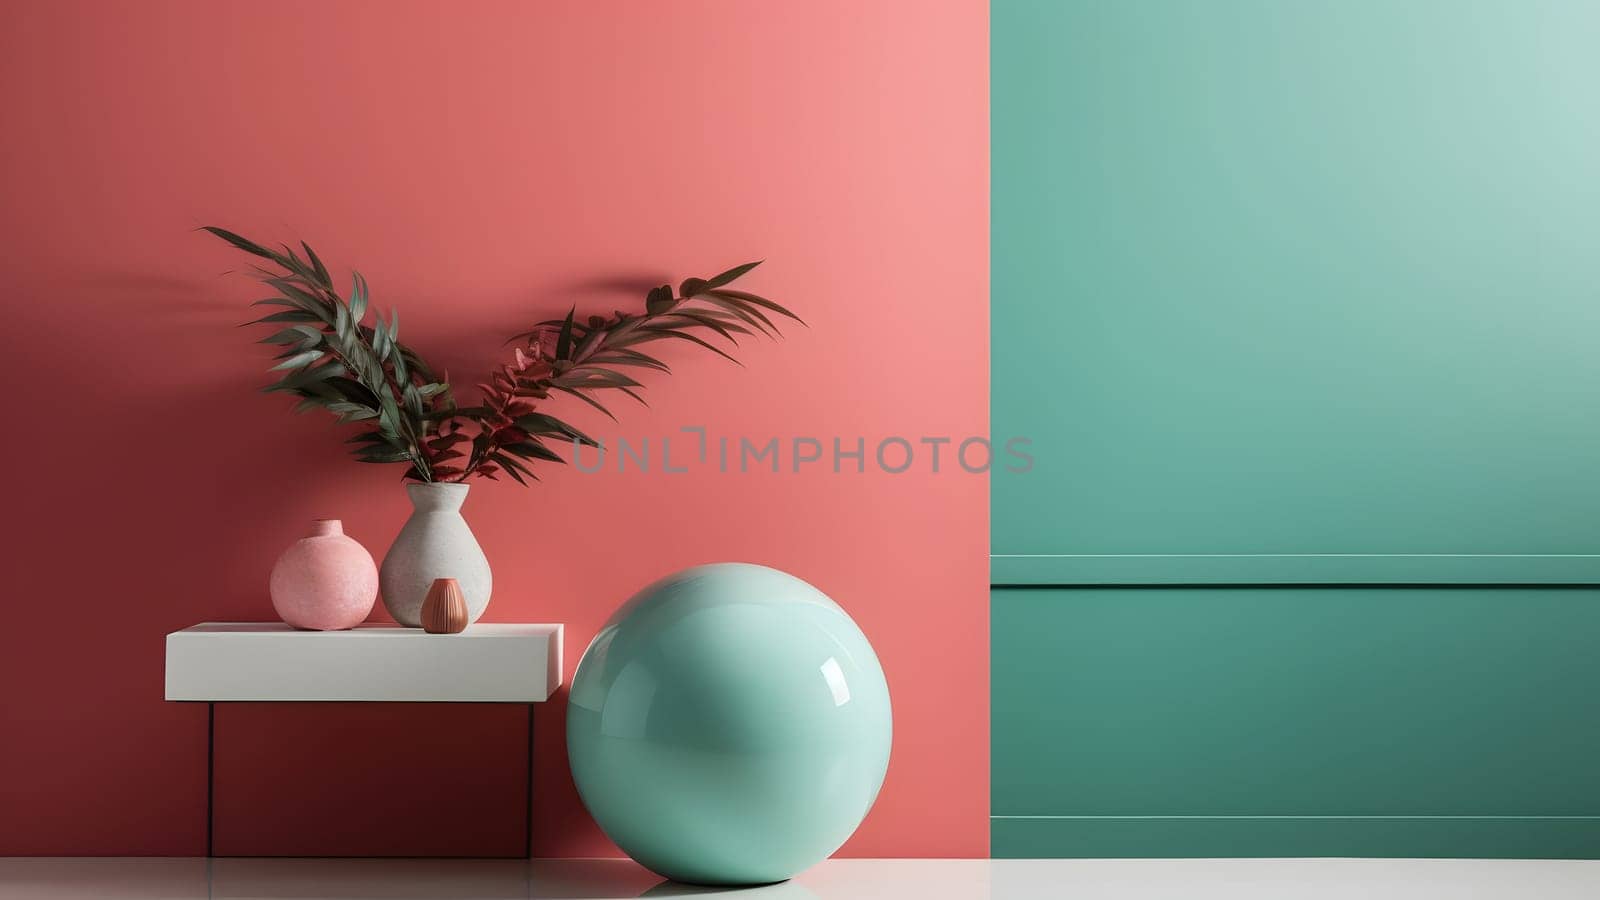 minimalistic composition scene with turquoise ball on white floor and coral pink wall near a vase with green plant. Neural network generated in May 2023. Not based on any actual scene or pattern.